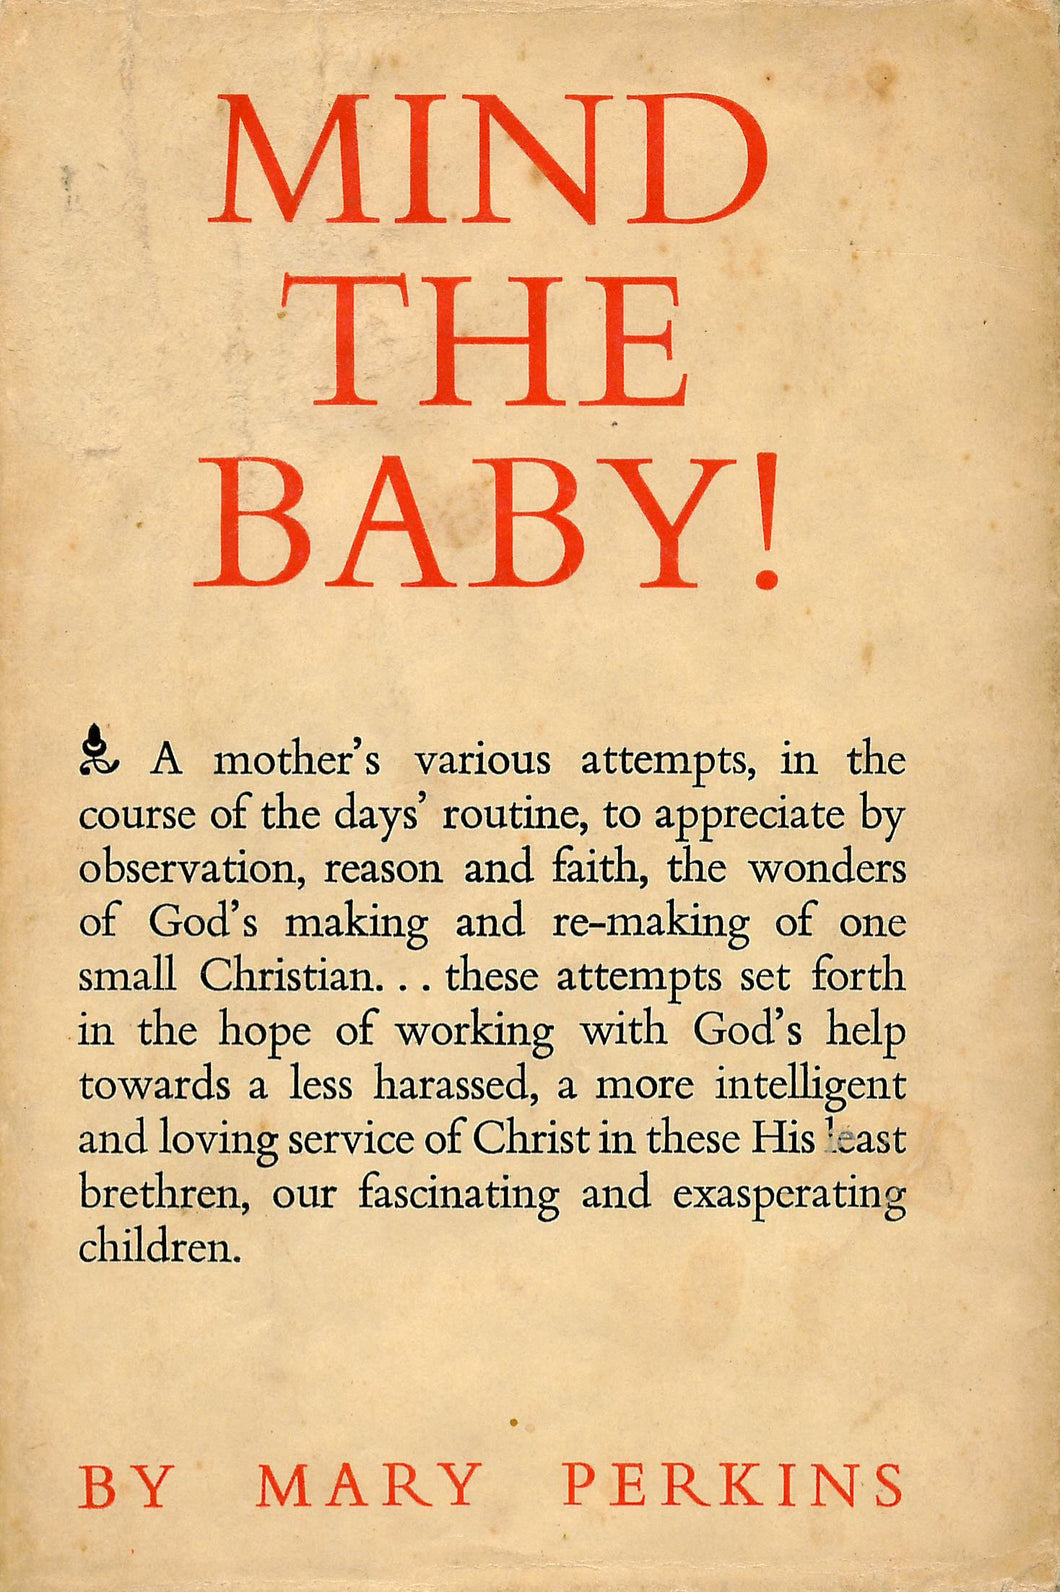 Mind the Baby!: a Mother's Various Attempts in the Course of the Day's Routine to Appreciate